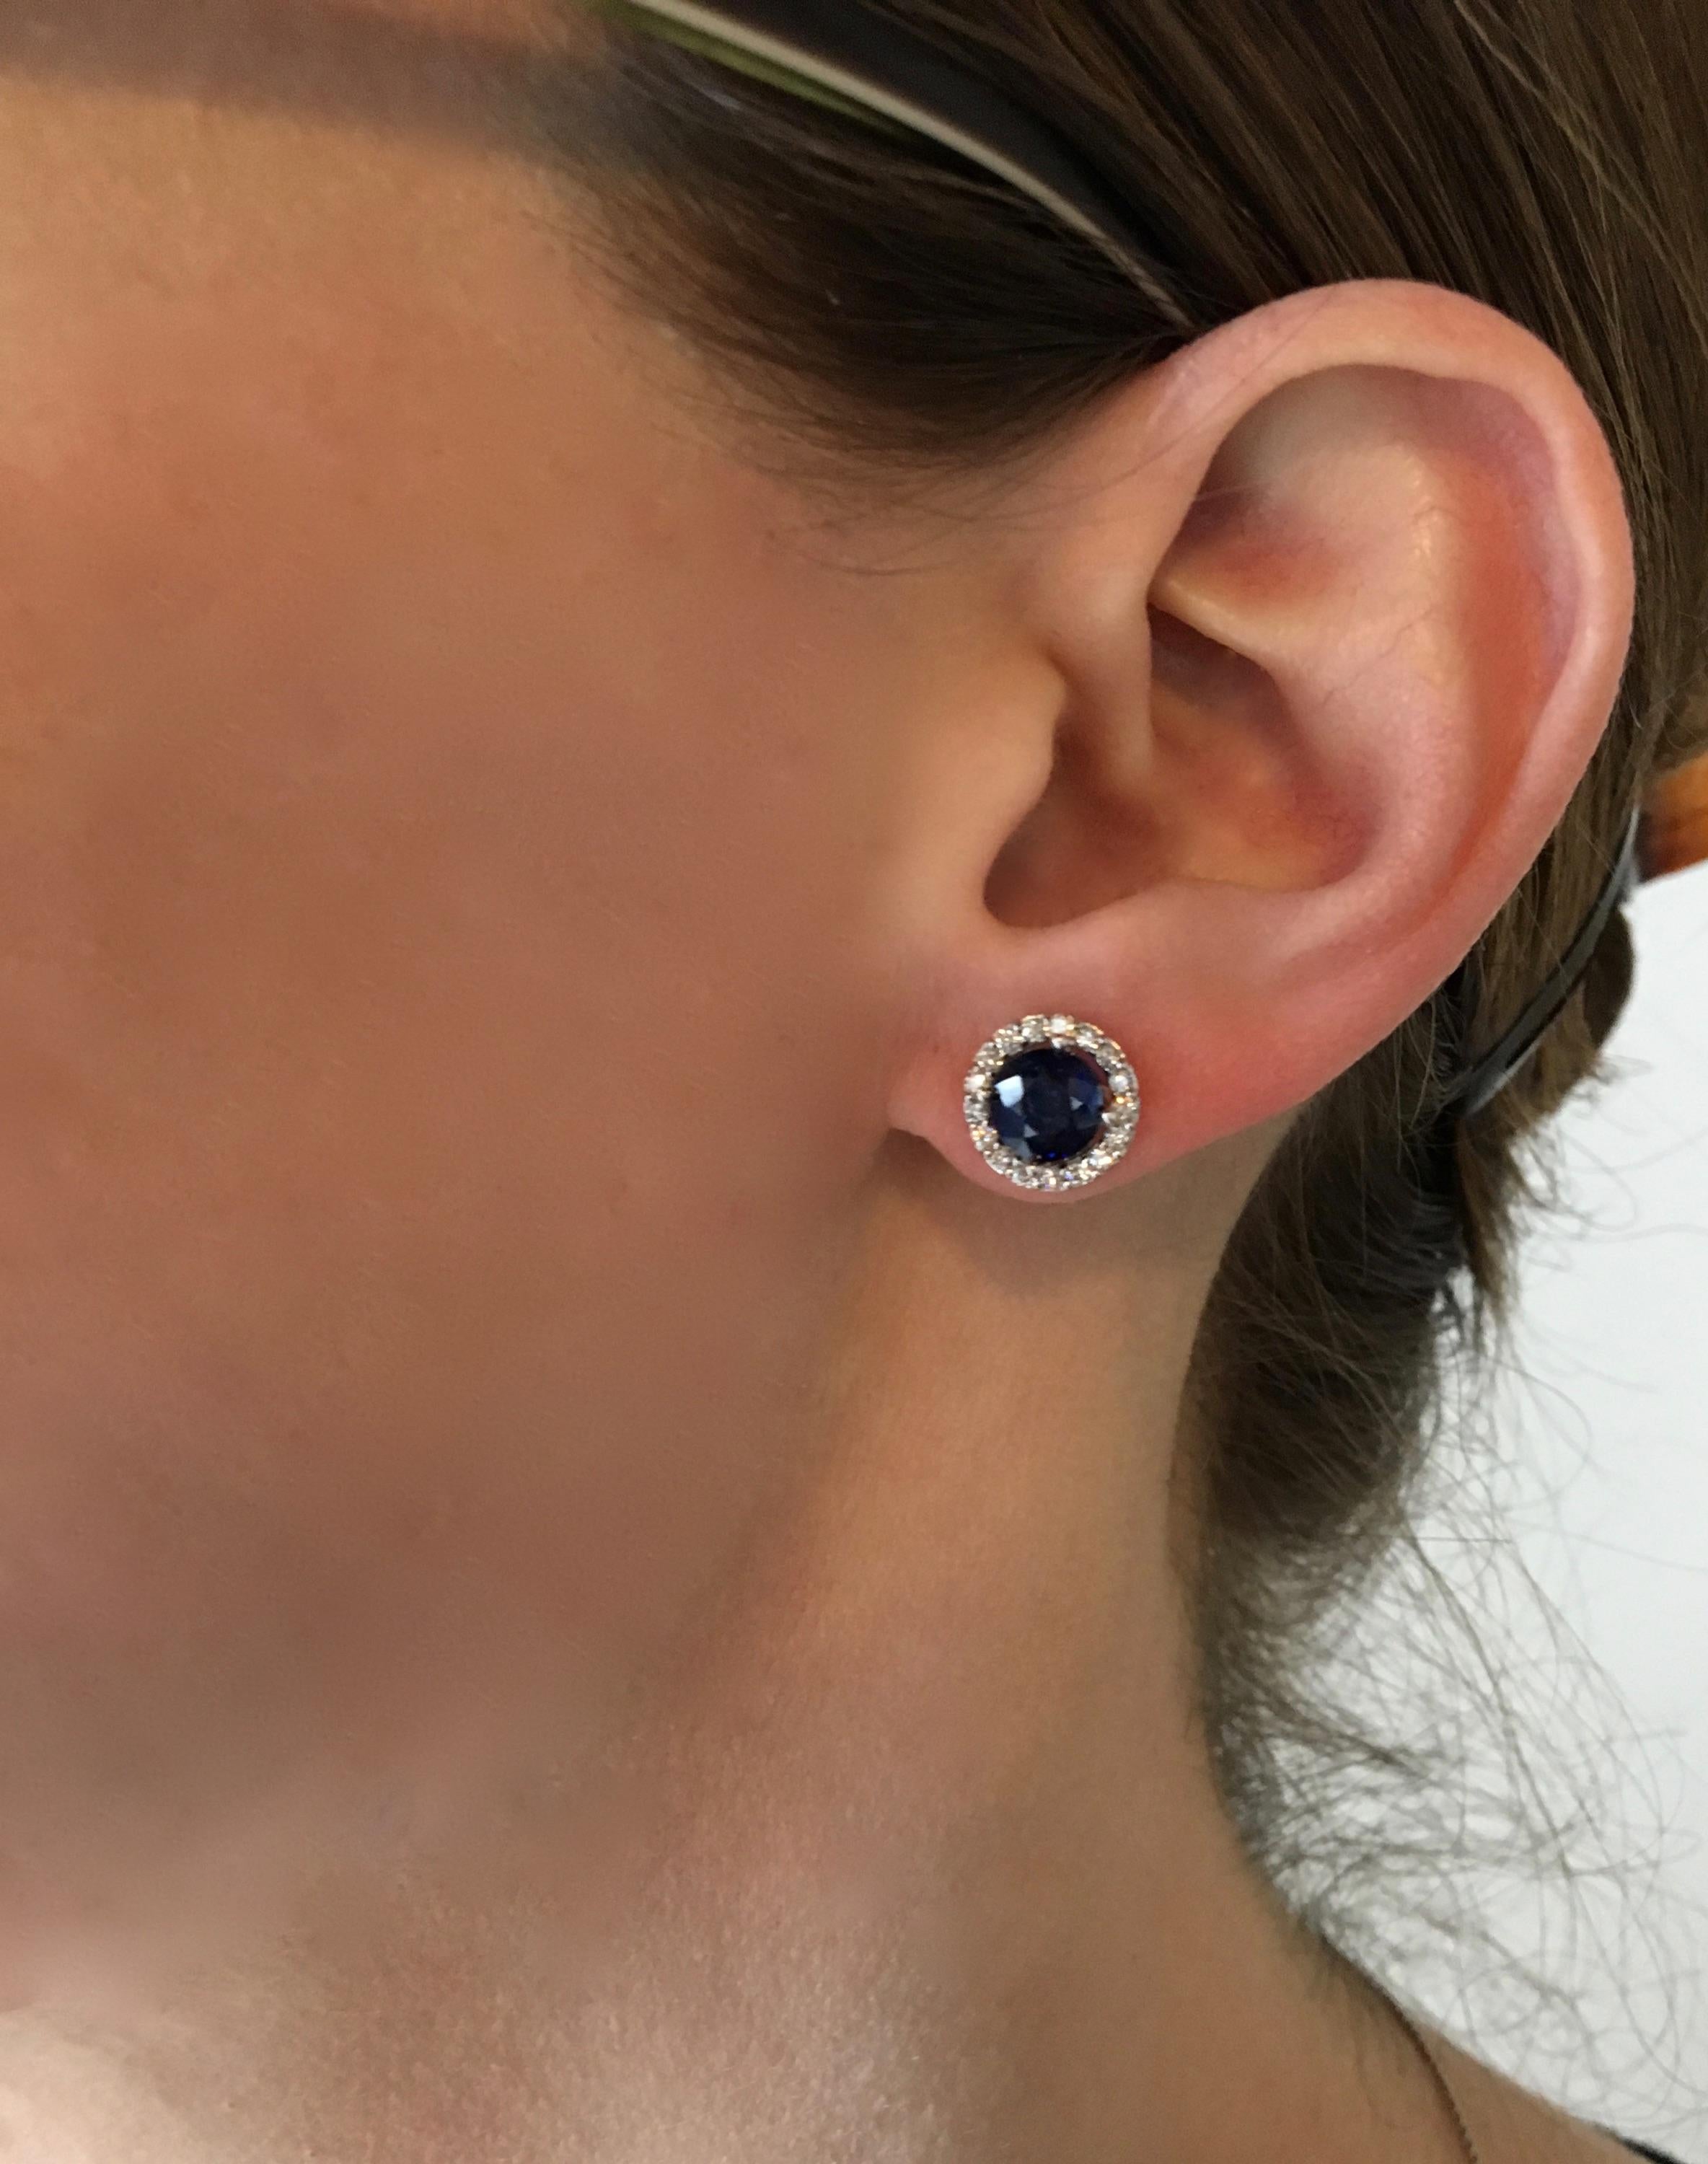 These halo style earrings feature two beautiful Blue Sapphires surrounded by approximately .50CTW of Round Brilliant Cut Diamonds.

Gemstone: Diamond & Sapphire
Gemstone Carat Weight: 6.33mm Round Cut Blue Sapphire
Diamond Carat Weight: